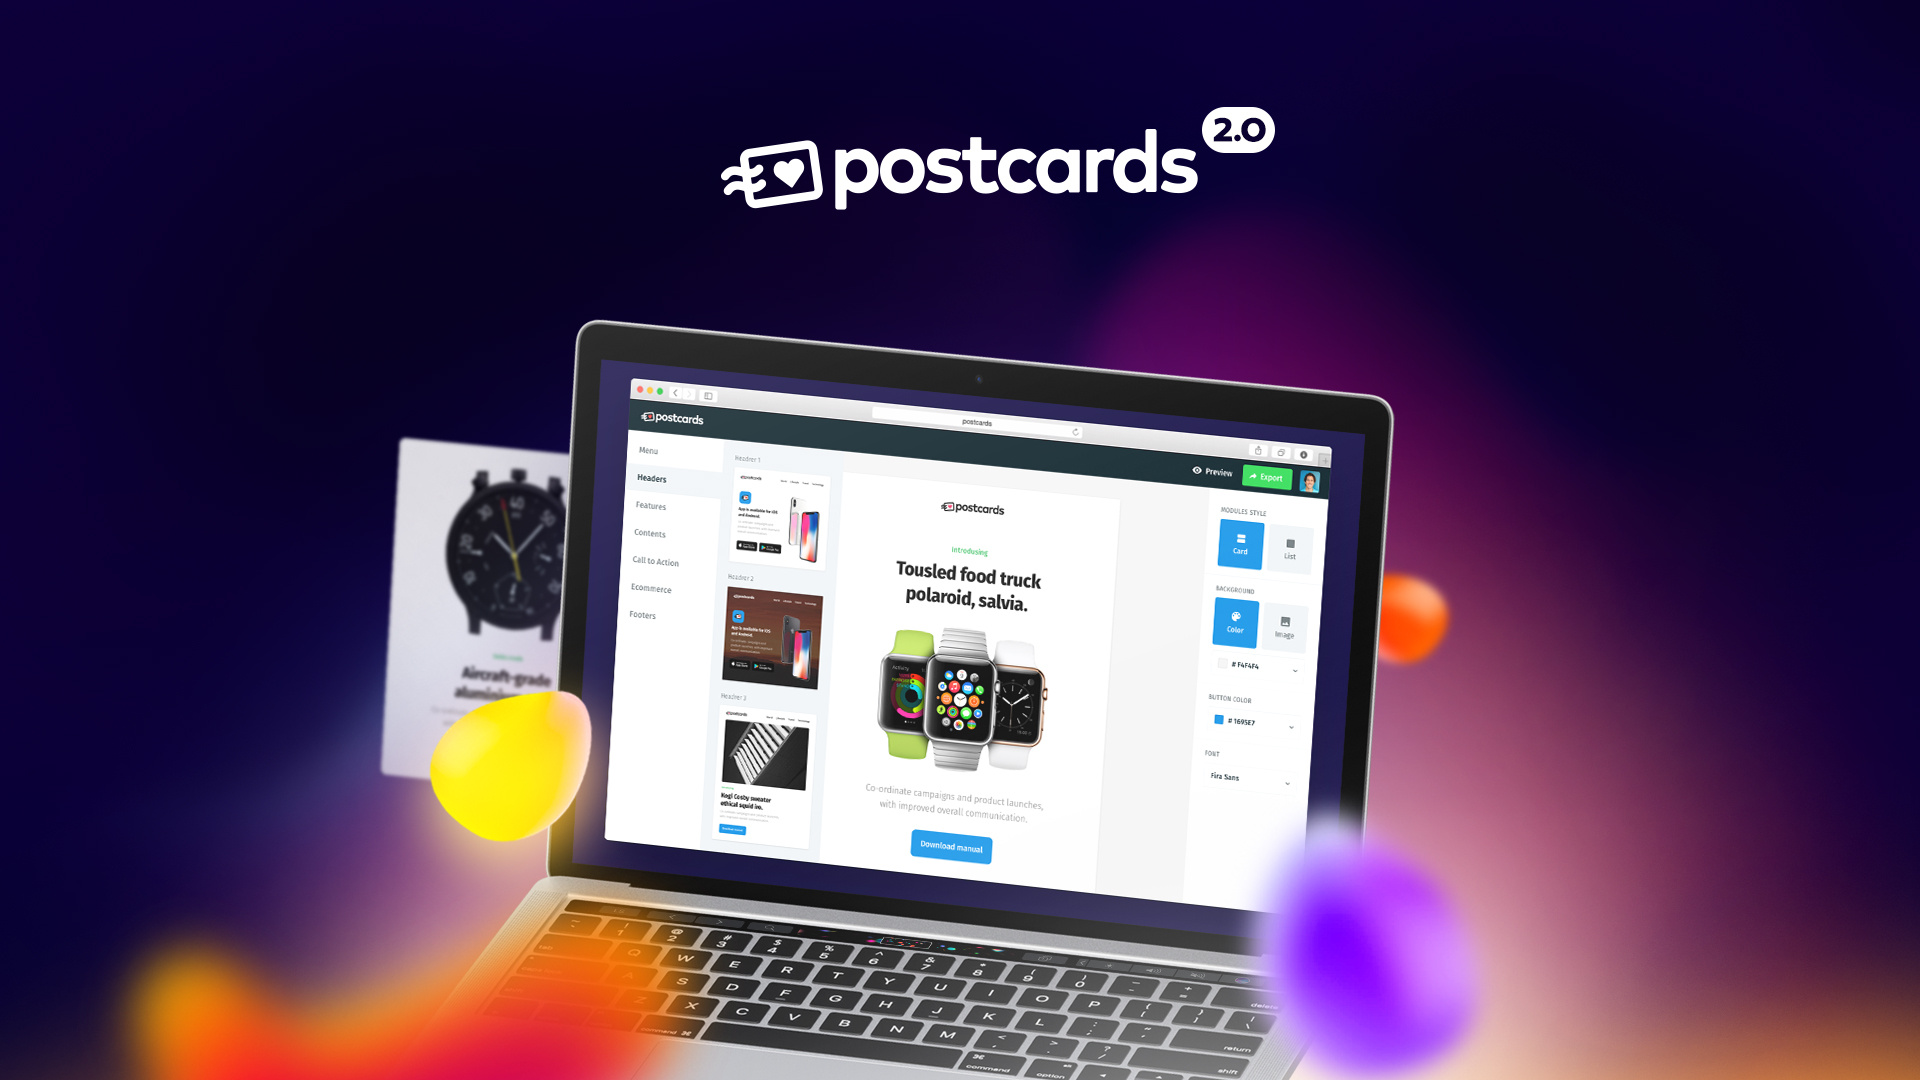 Find detailed information about Postcards